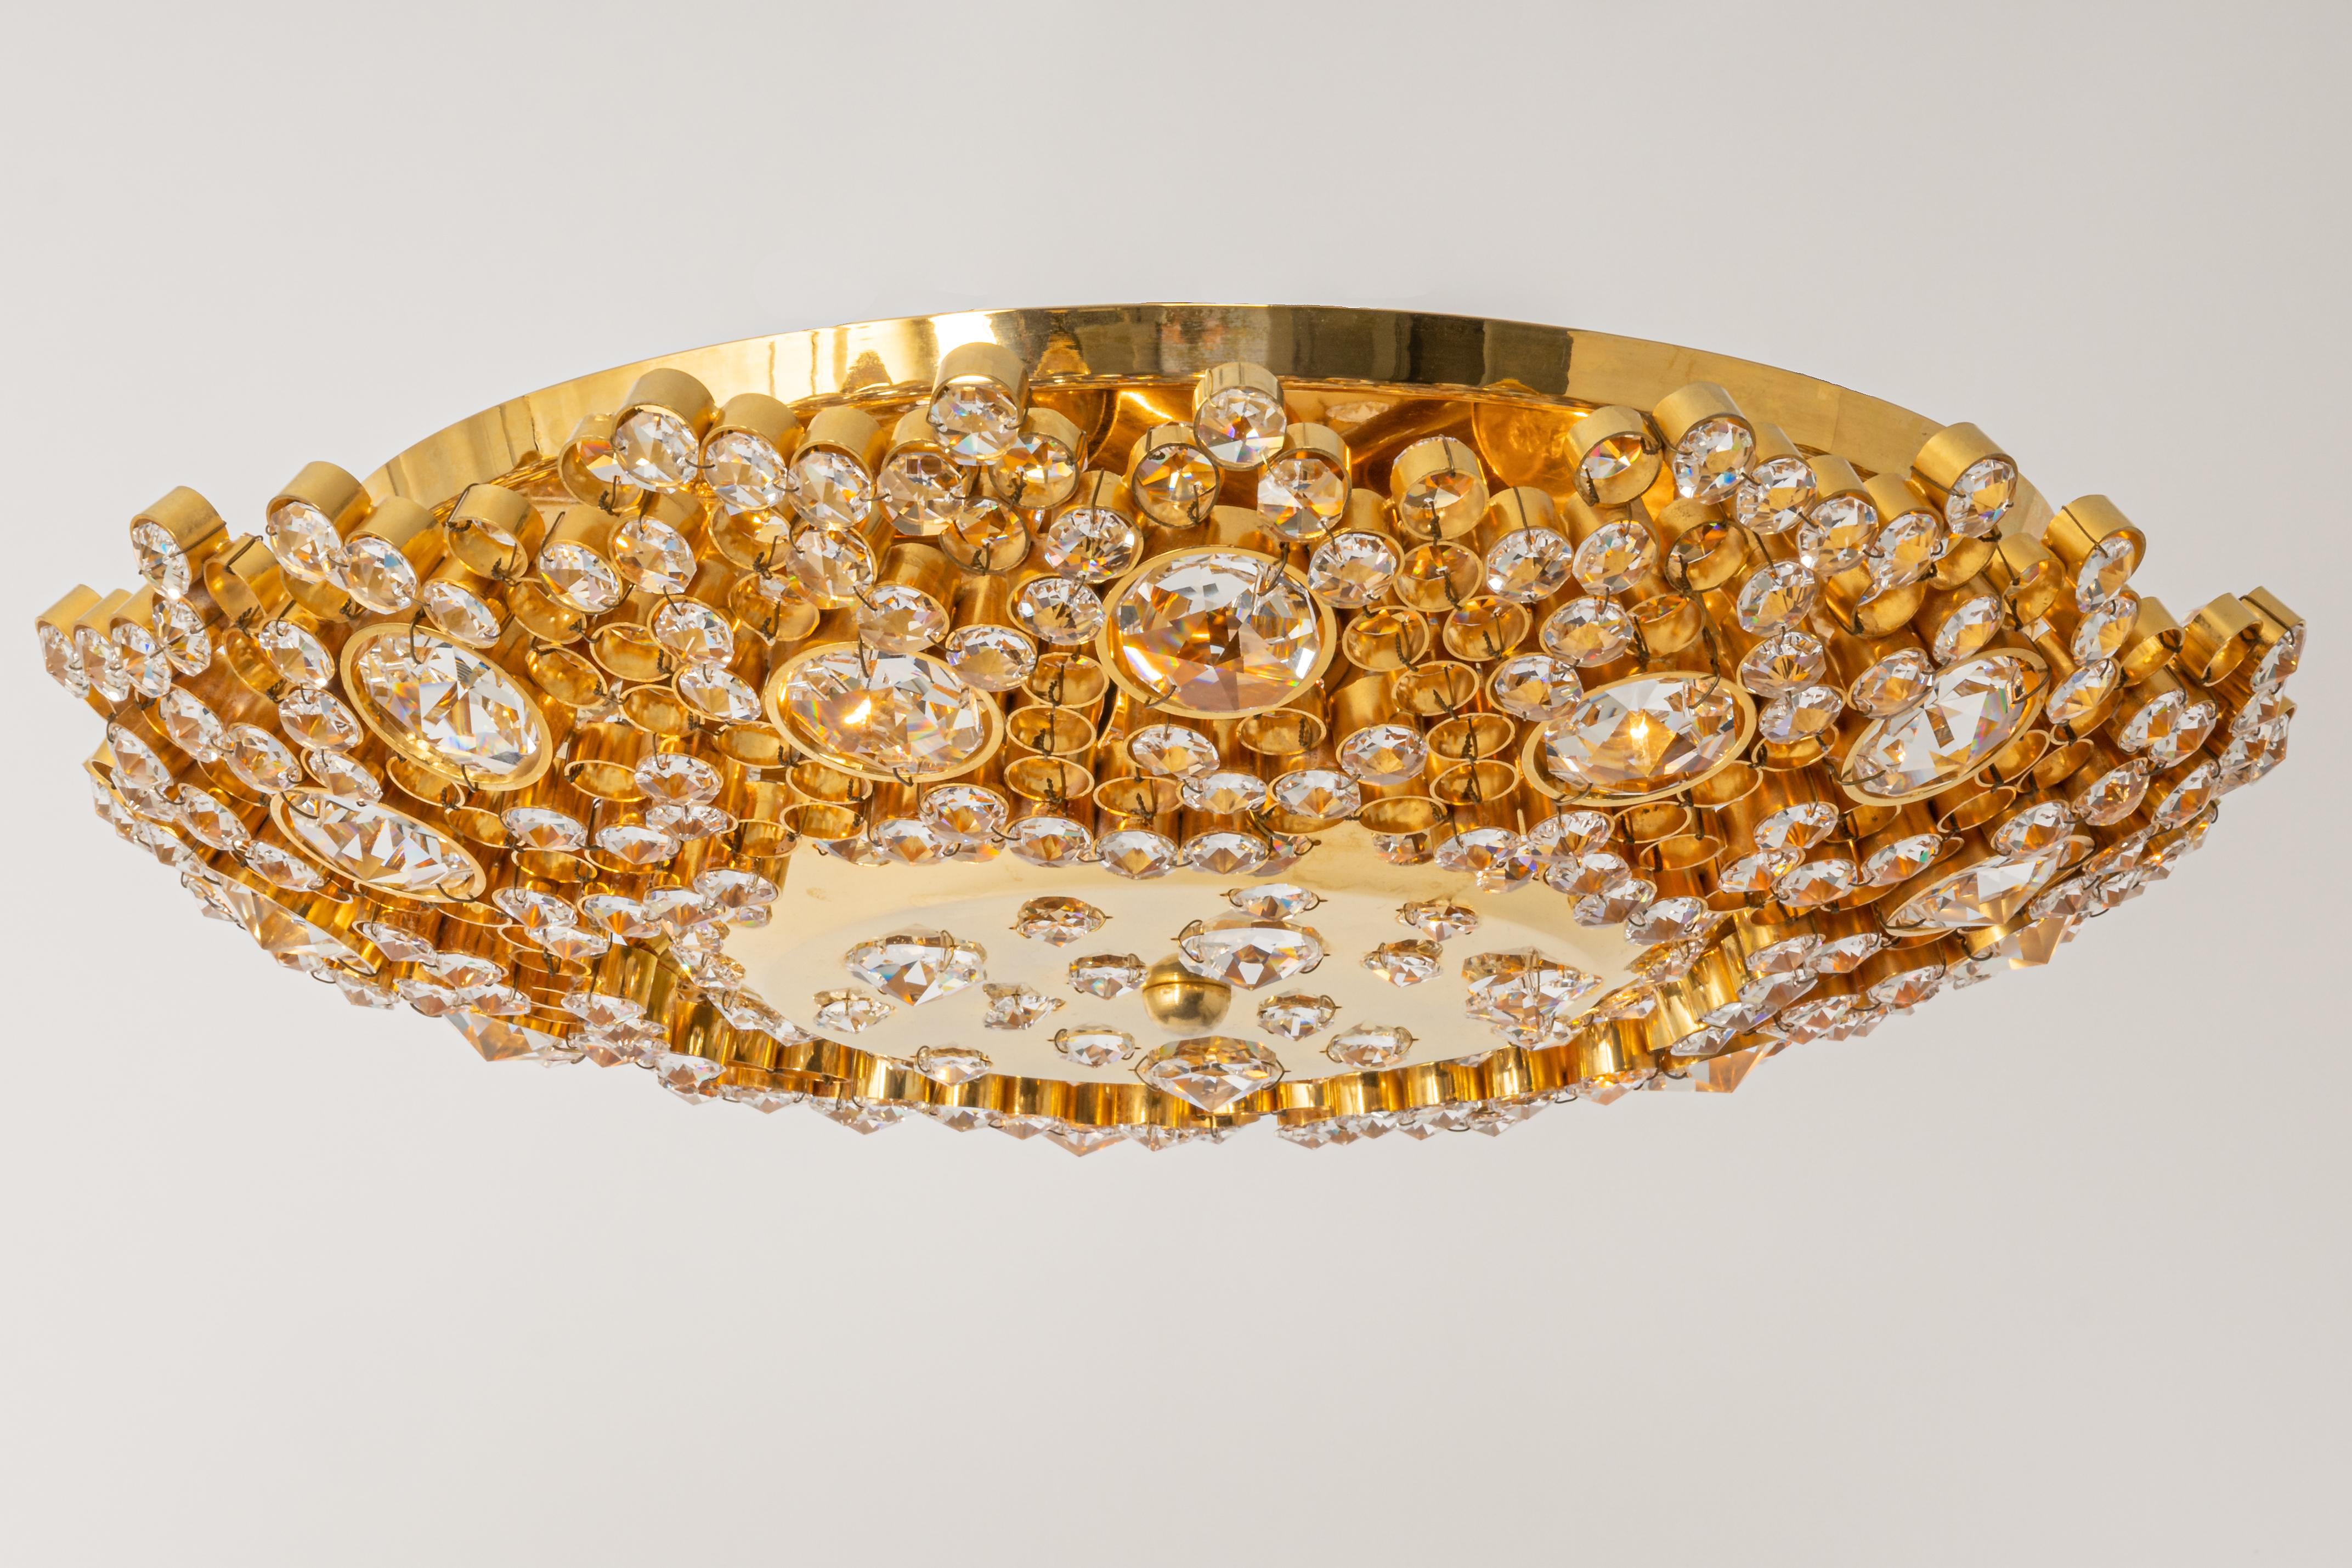 Delicate floral Flush mount light with crystal glass and gilded brass parts made by Palwa, Germany, 1970s. Featuring a multitude of crystal glasses.

Sockets: 5 small bulbs (E-14) max each 40W.
Light bulbs are not included. It is possible to